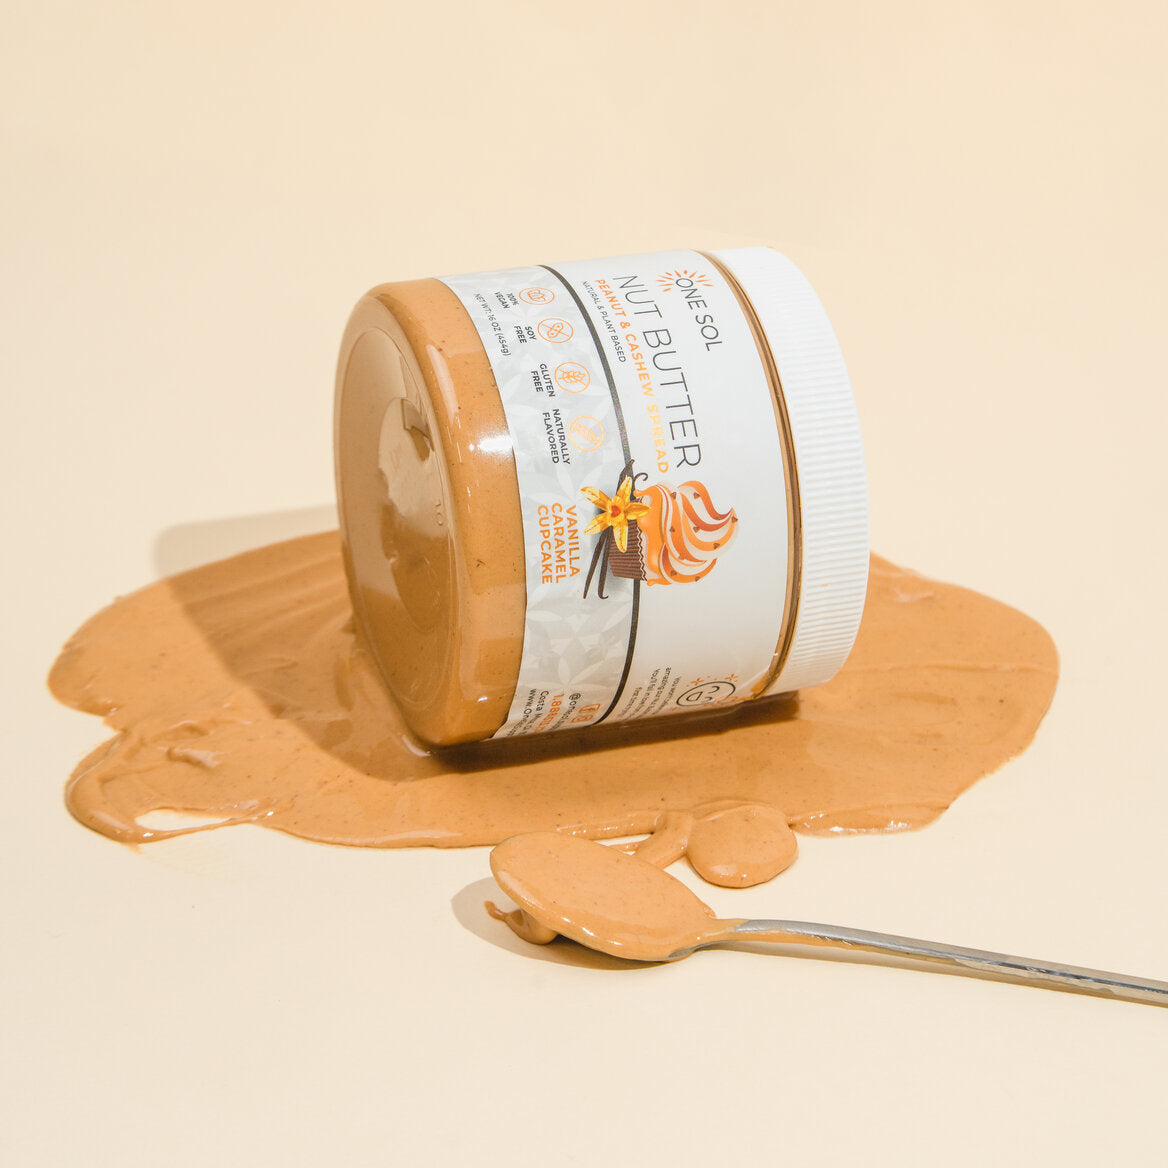 One Sol Nut Butter